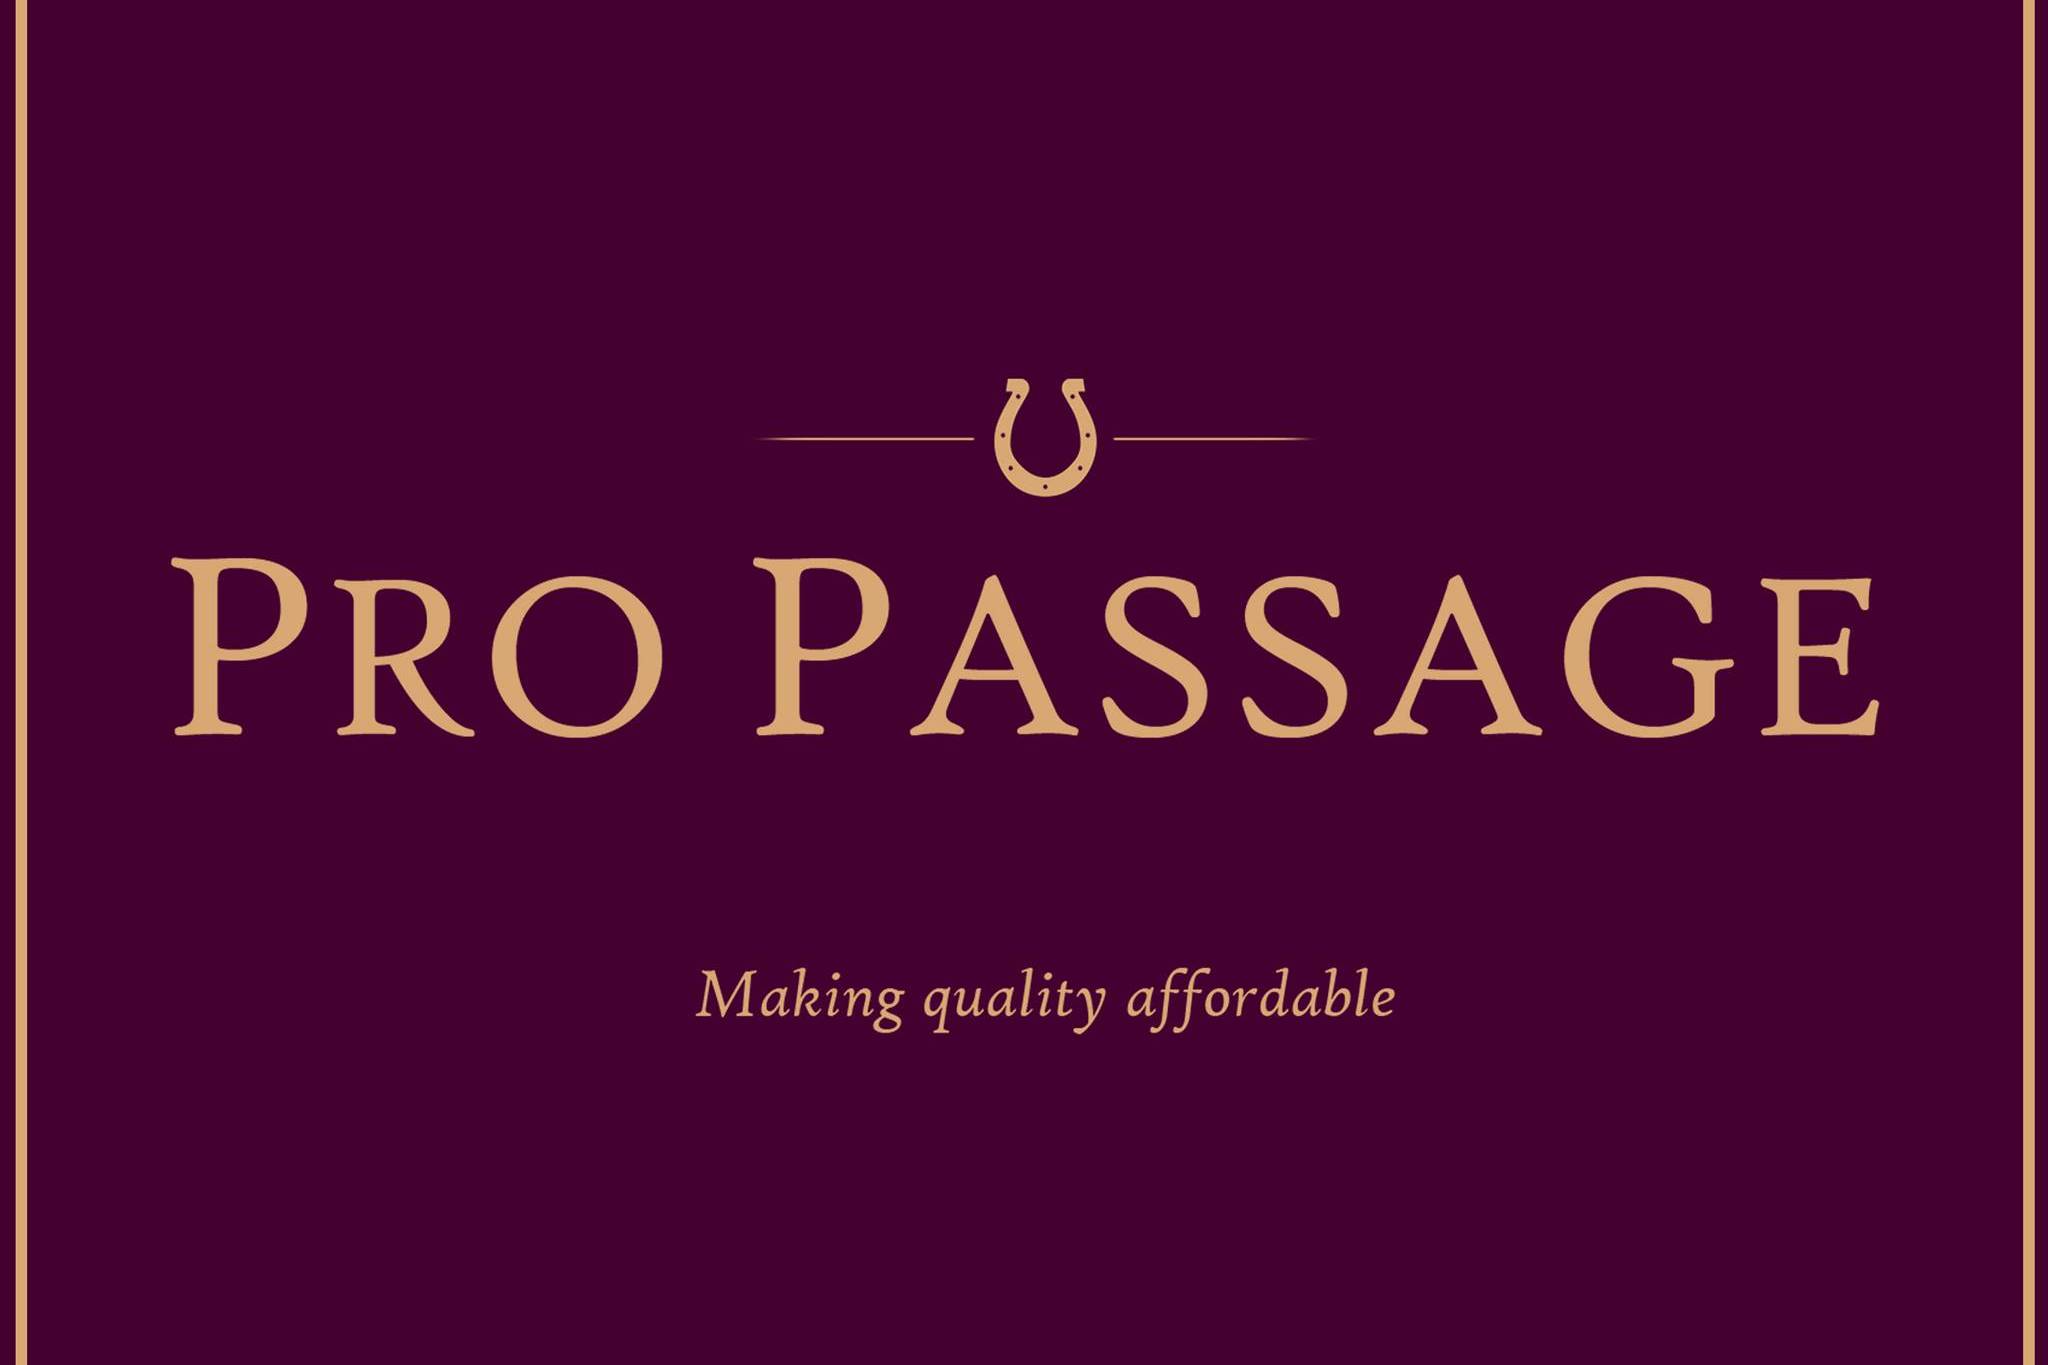 To the Pro Passage horse shop page